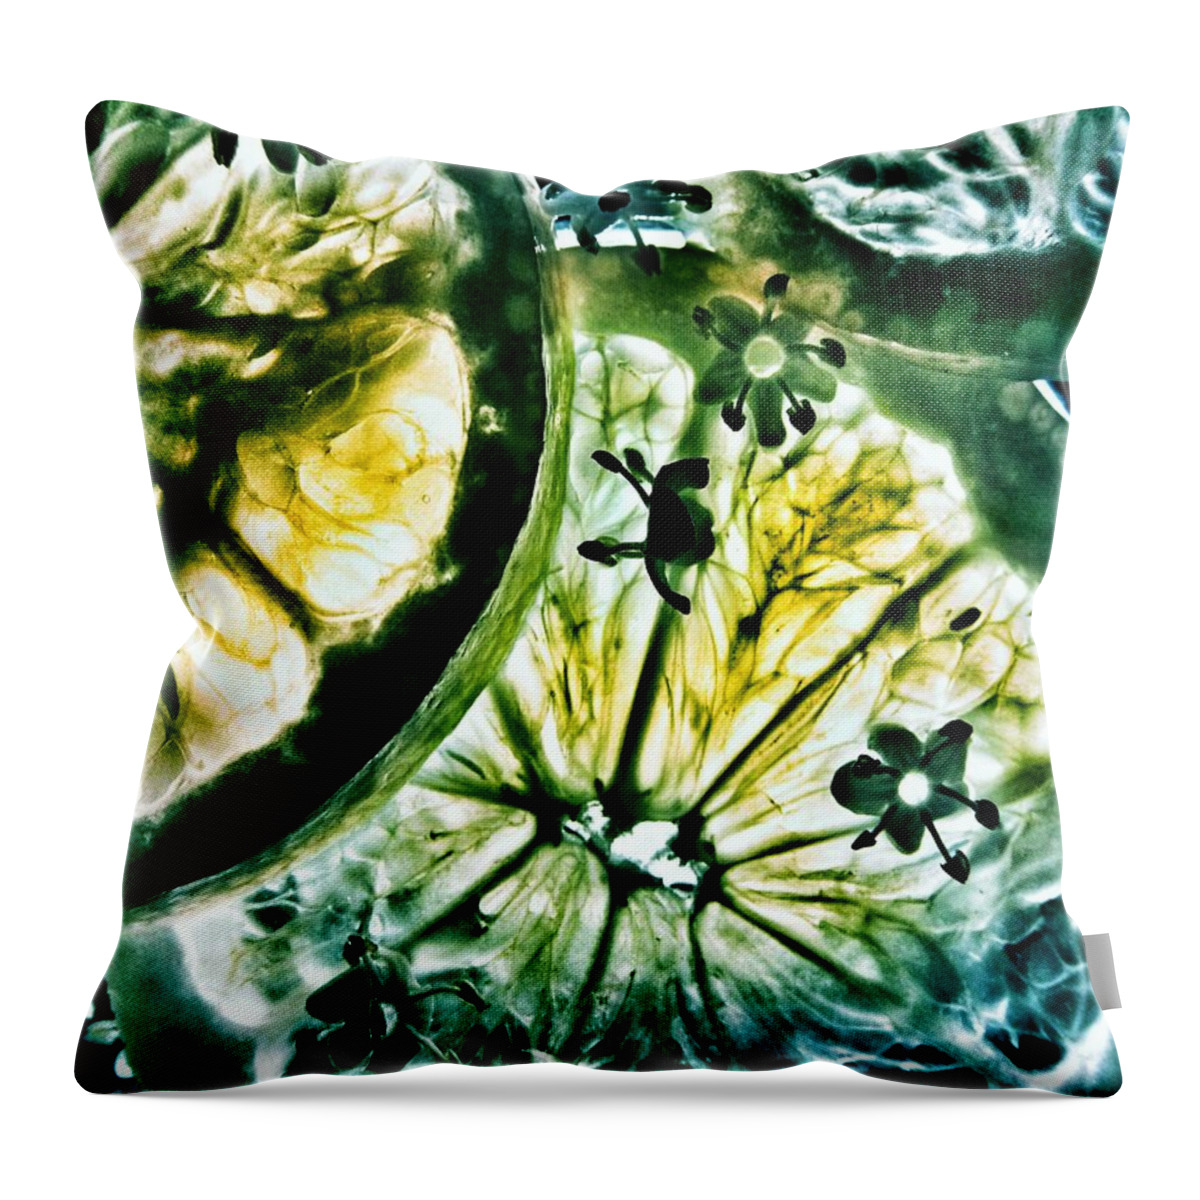 Lemon And Lime Throw Pillow featuring the photograph Lemon and Lime by Marianna Mills